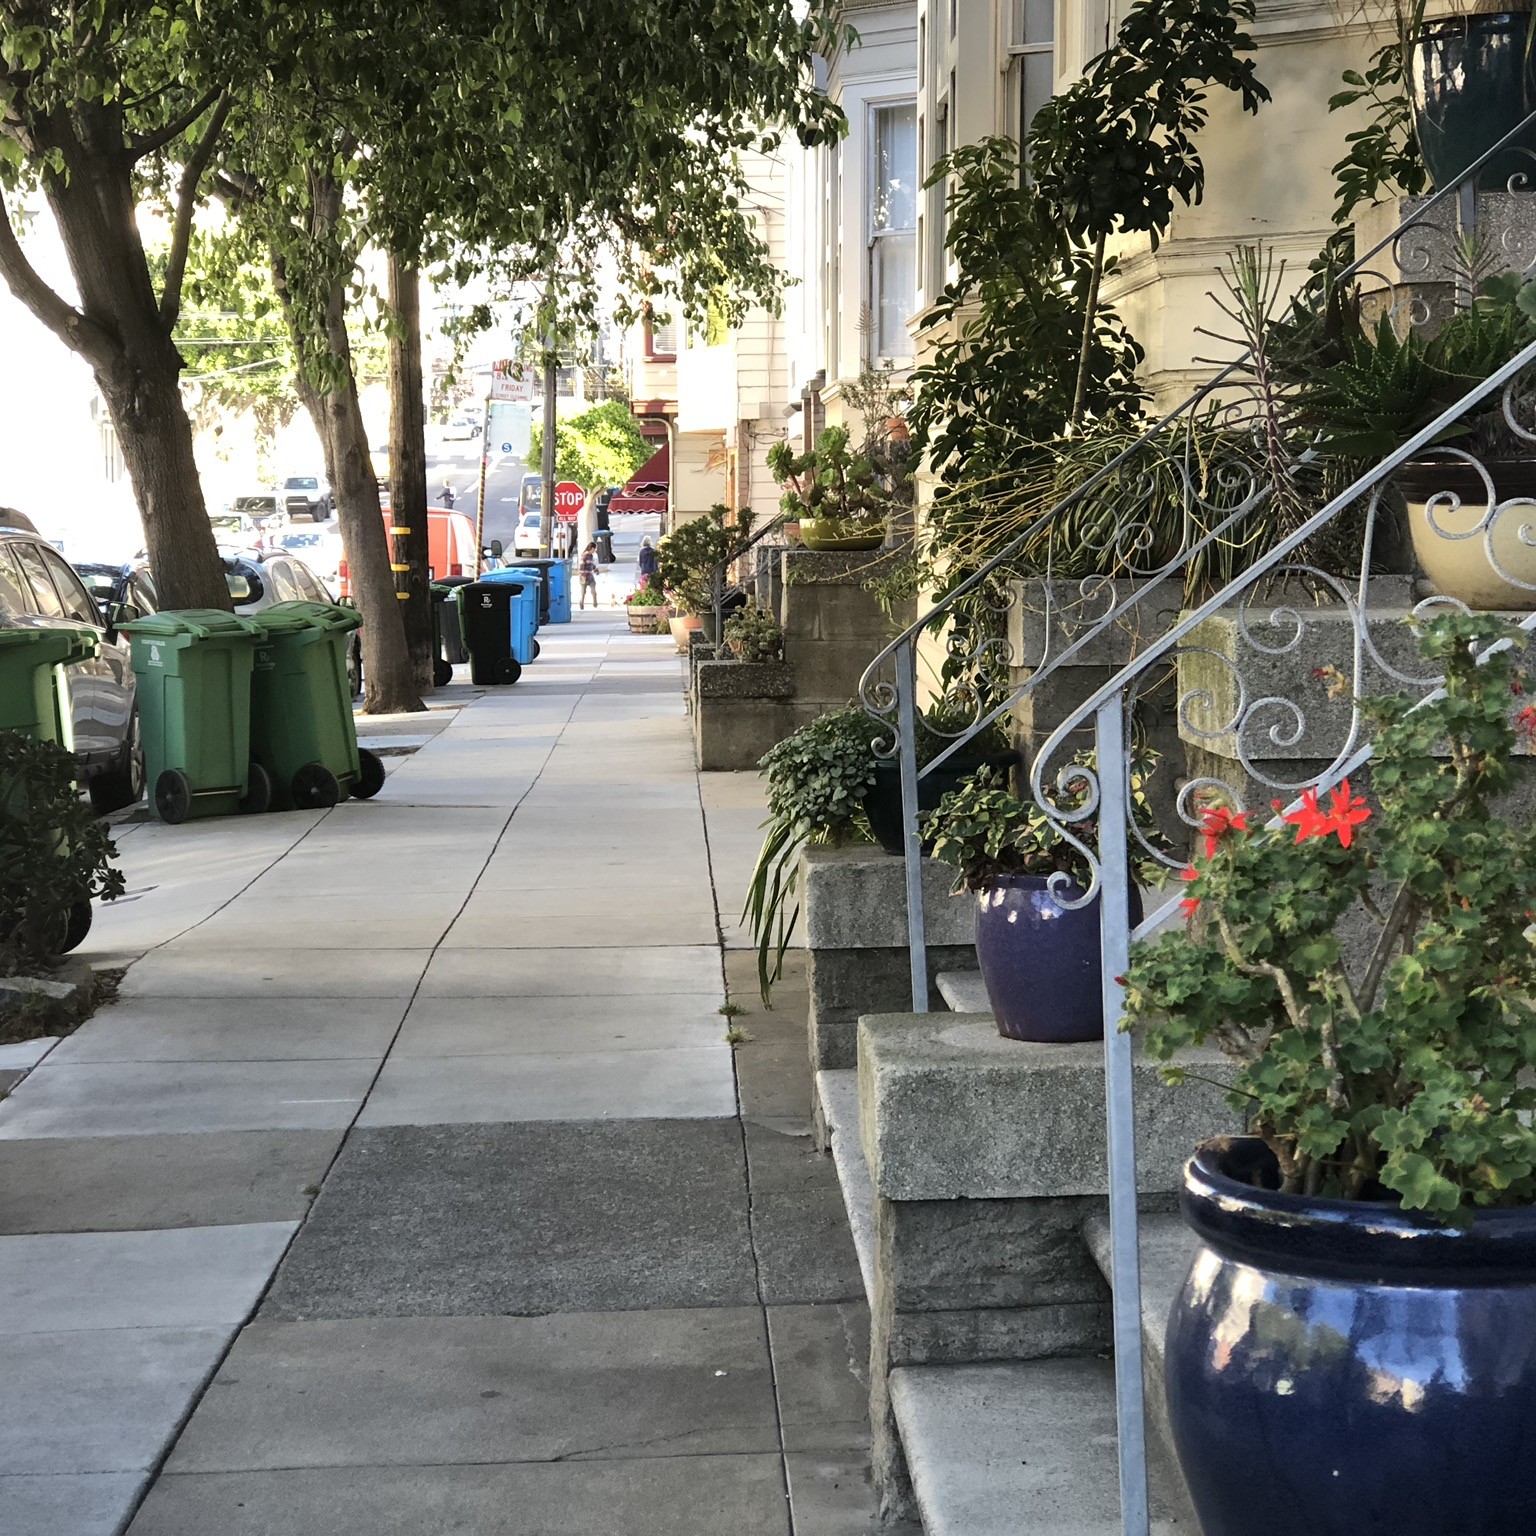 A residential sidewalk in San Francisco. There are stair stoops to the right and green, blue, and black bins lined up to the left, along the curb